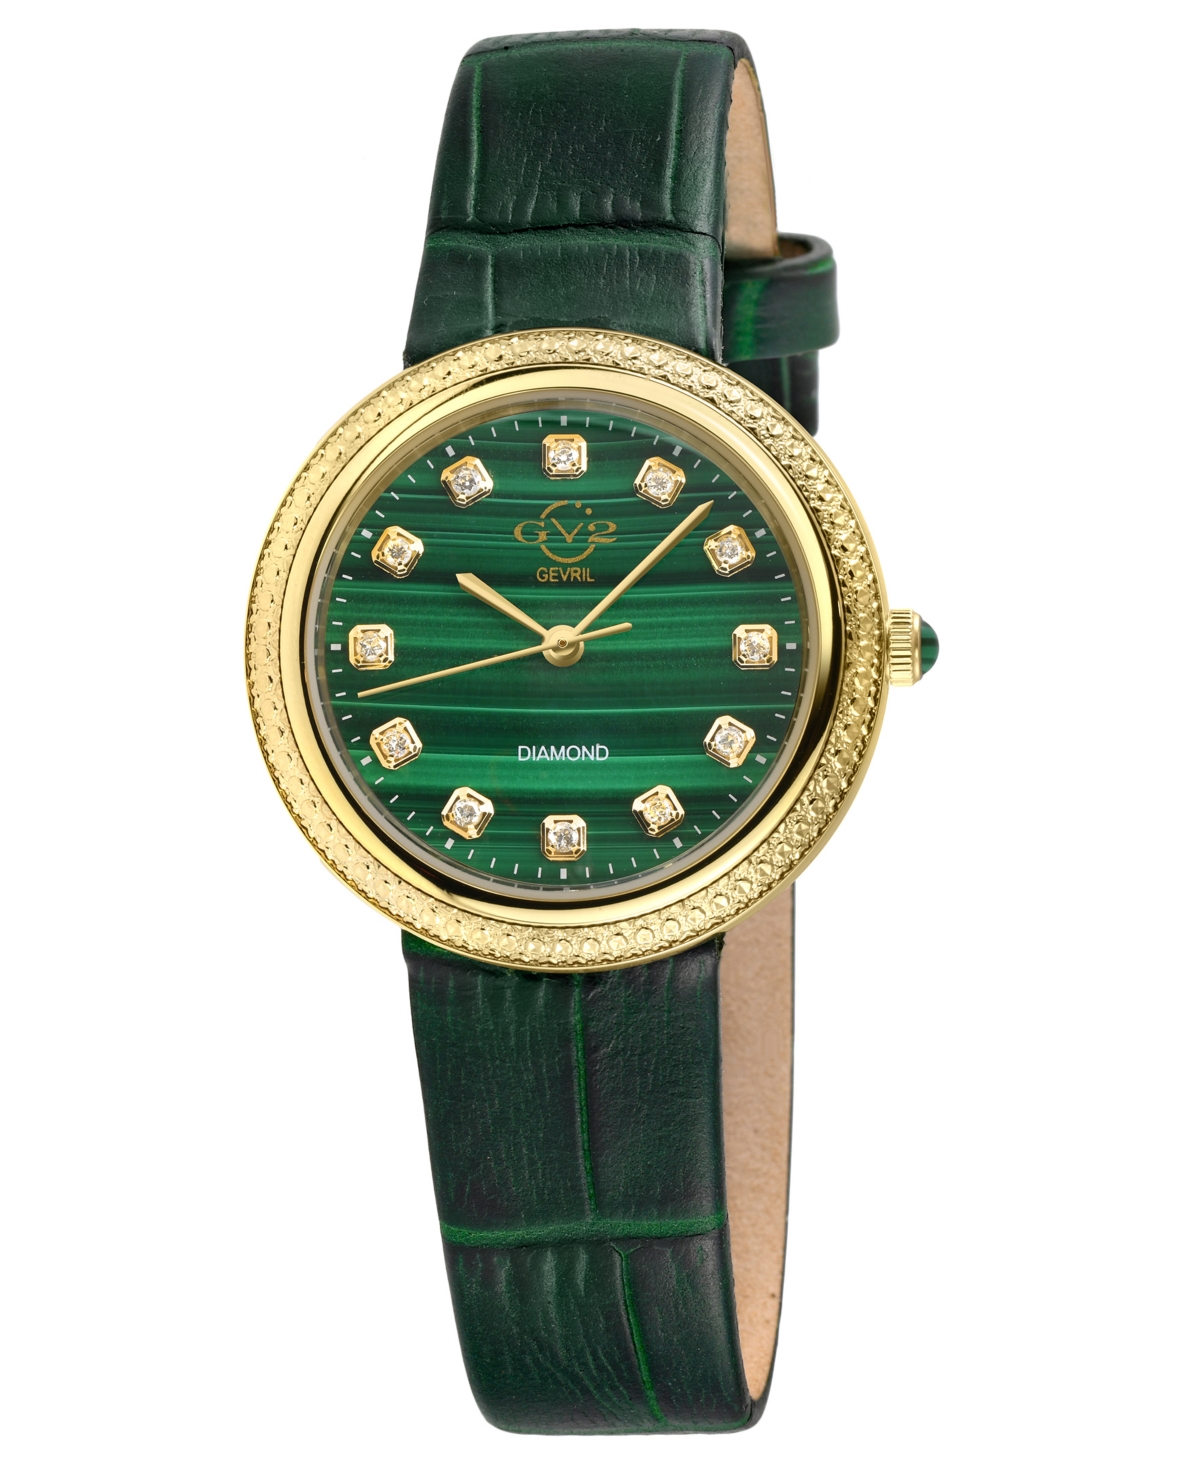 Gv2 By Gevril Women's Arezzo Green Leather Watch 33mm In Gold